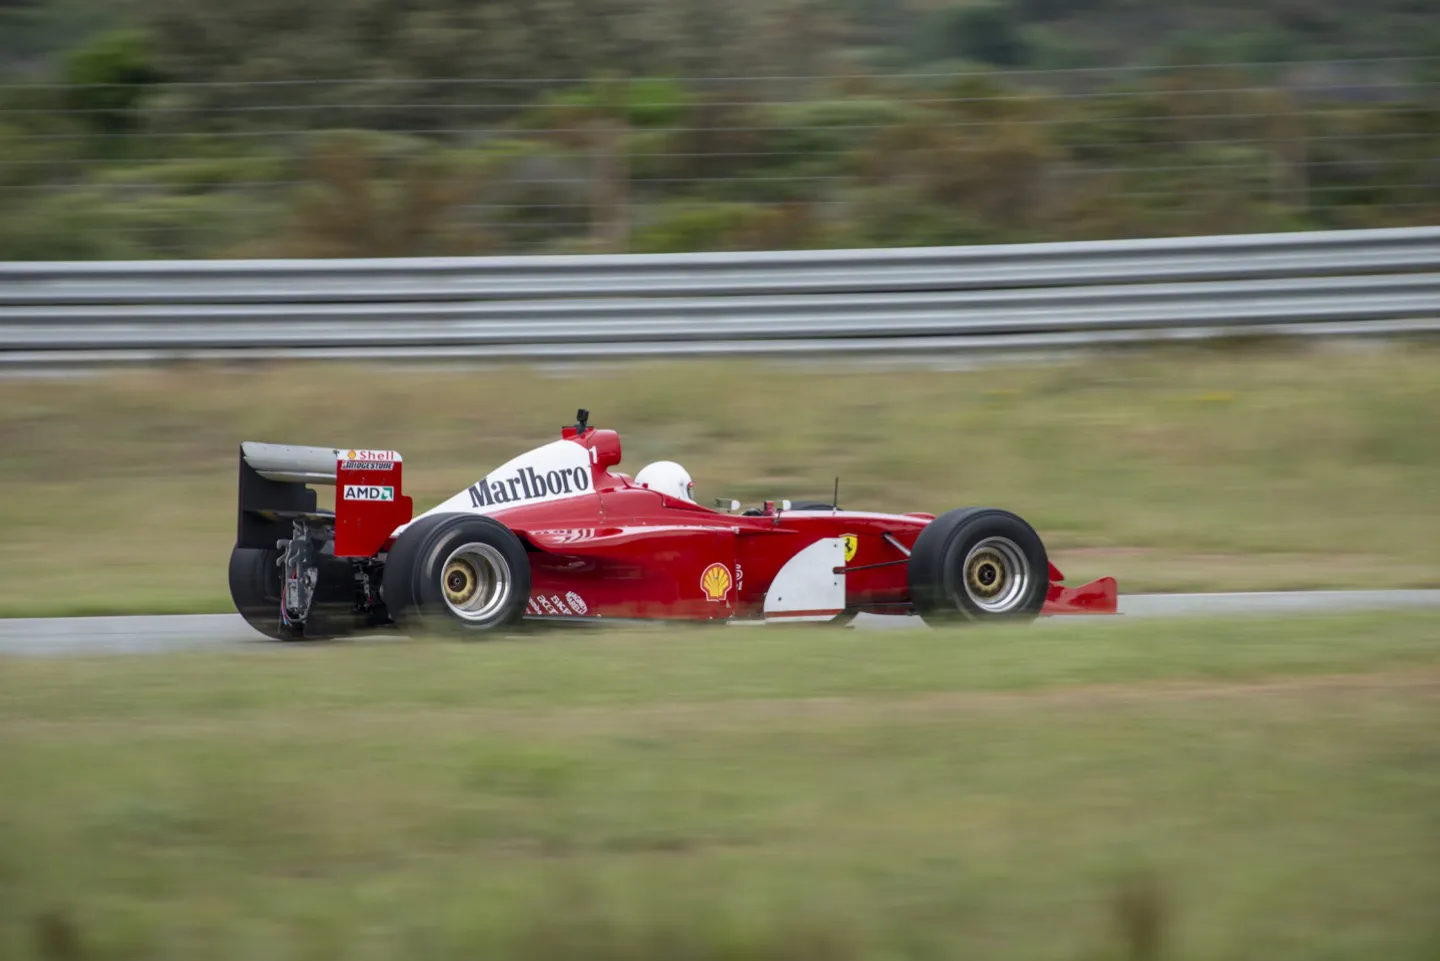 Experience what it's like to be an F1 driver at a private track day